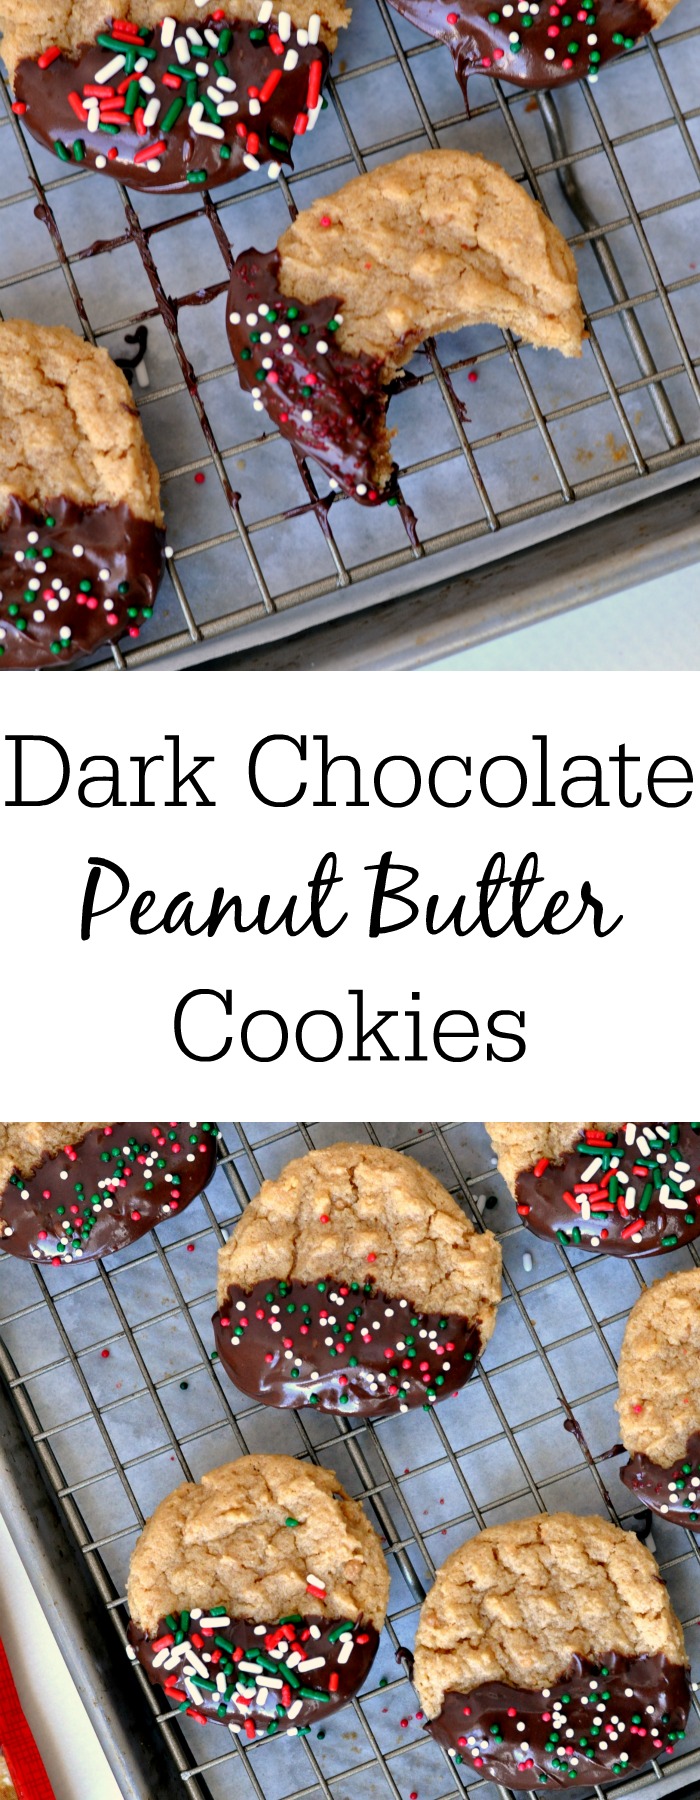 Super simple dark chocolate peanut butter cookies are perfect for your holiday baking.